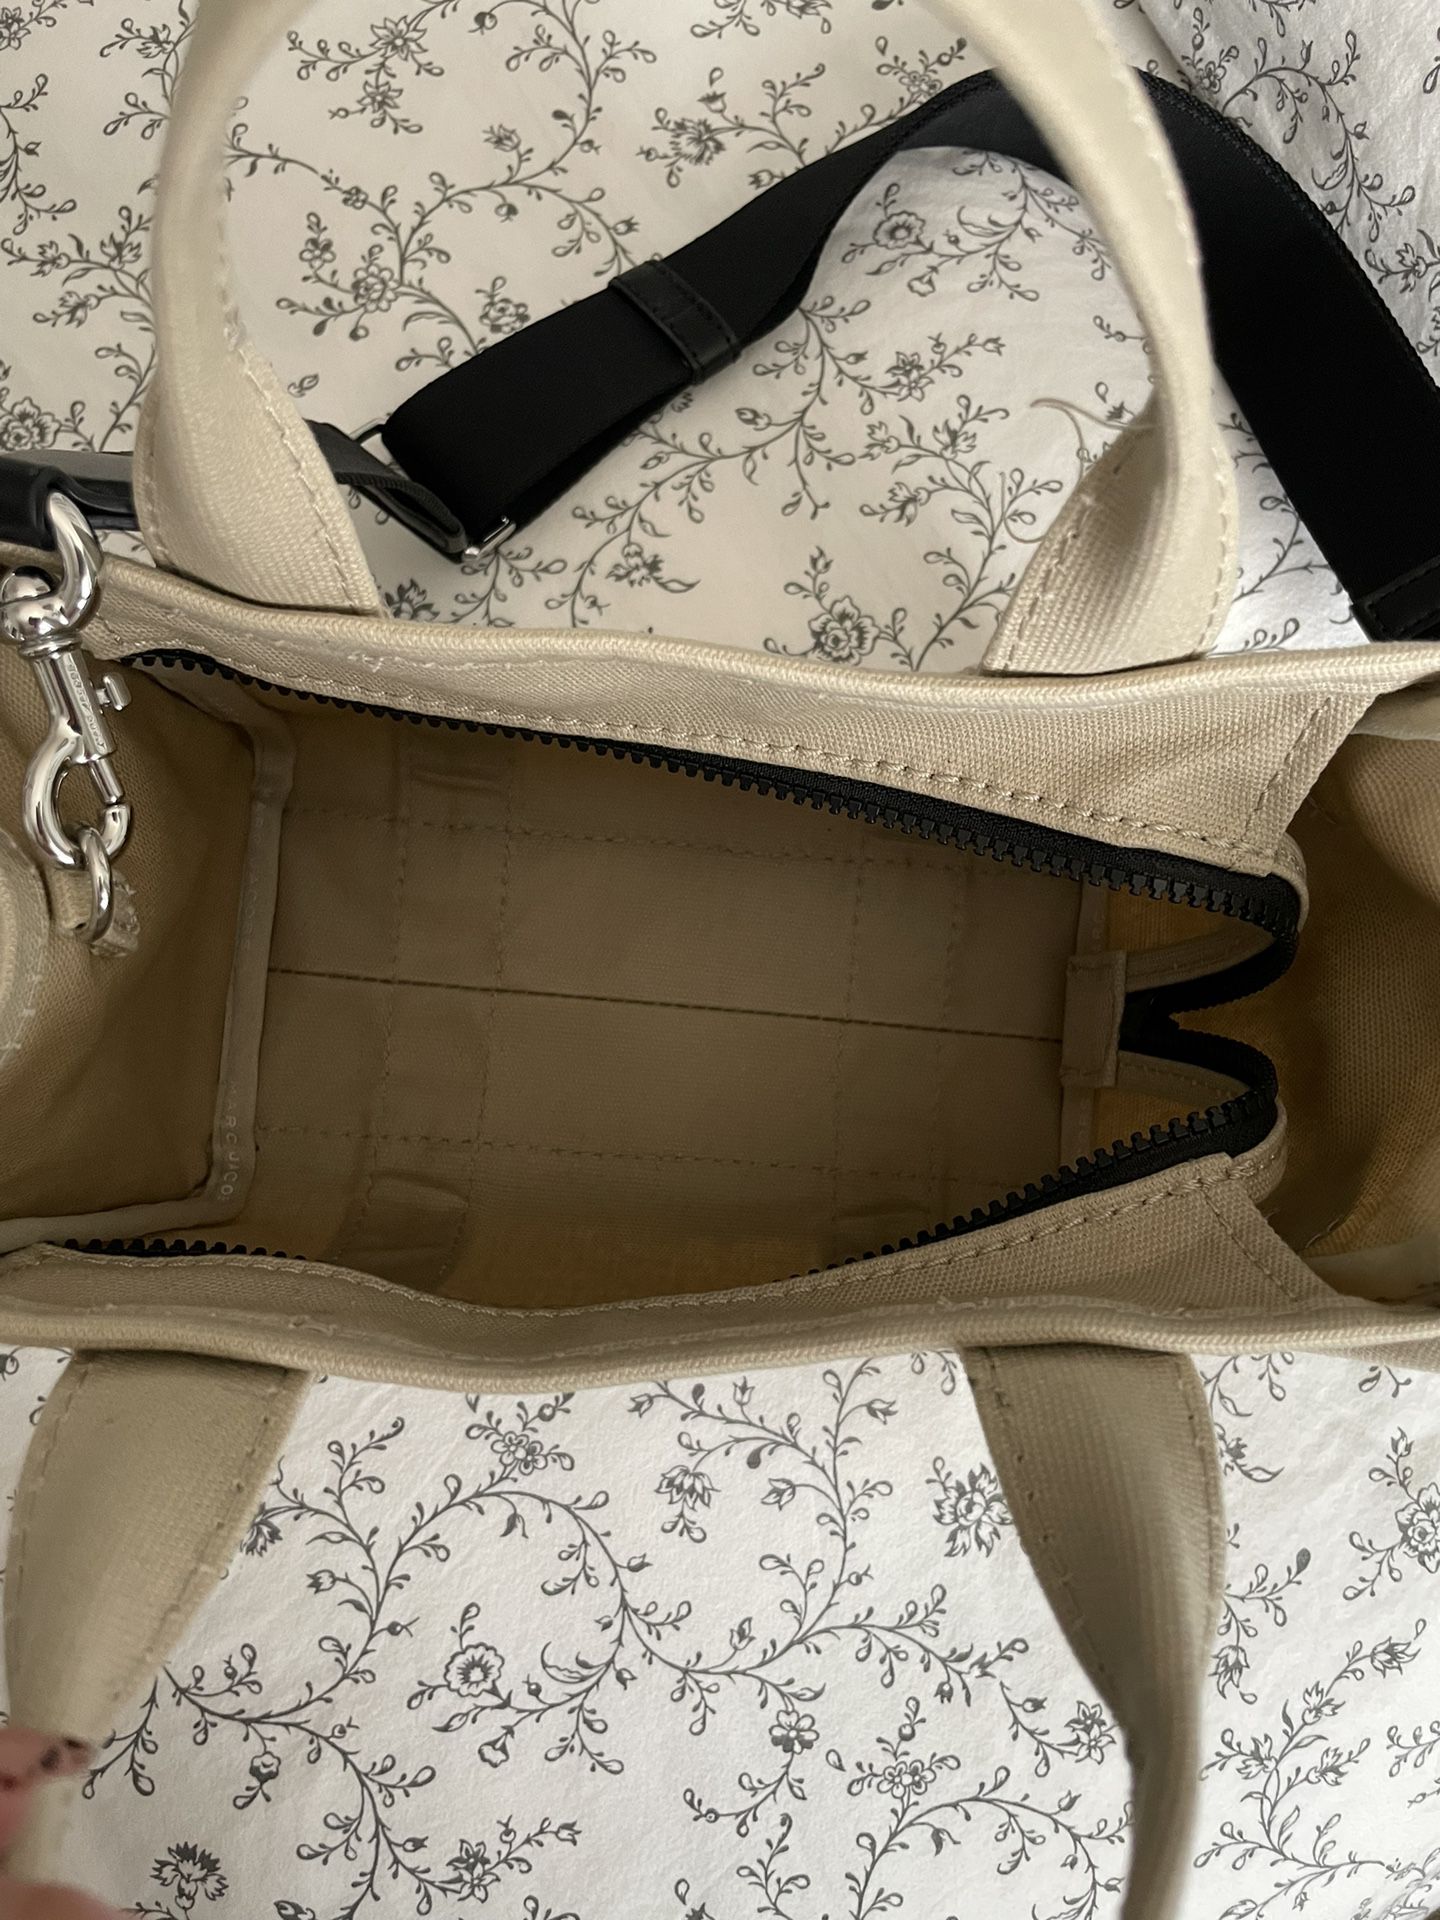 Marc Jacobs Tote Bag for Sale in Bakersfield, CA - OfferUp